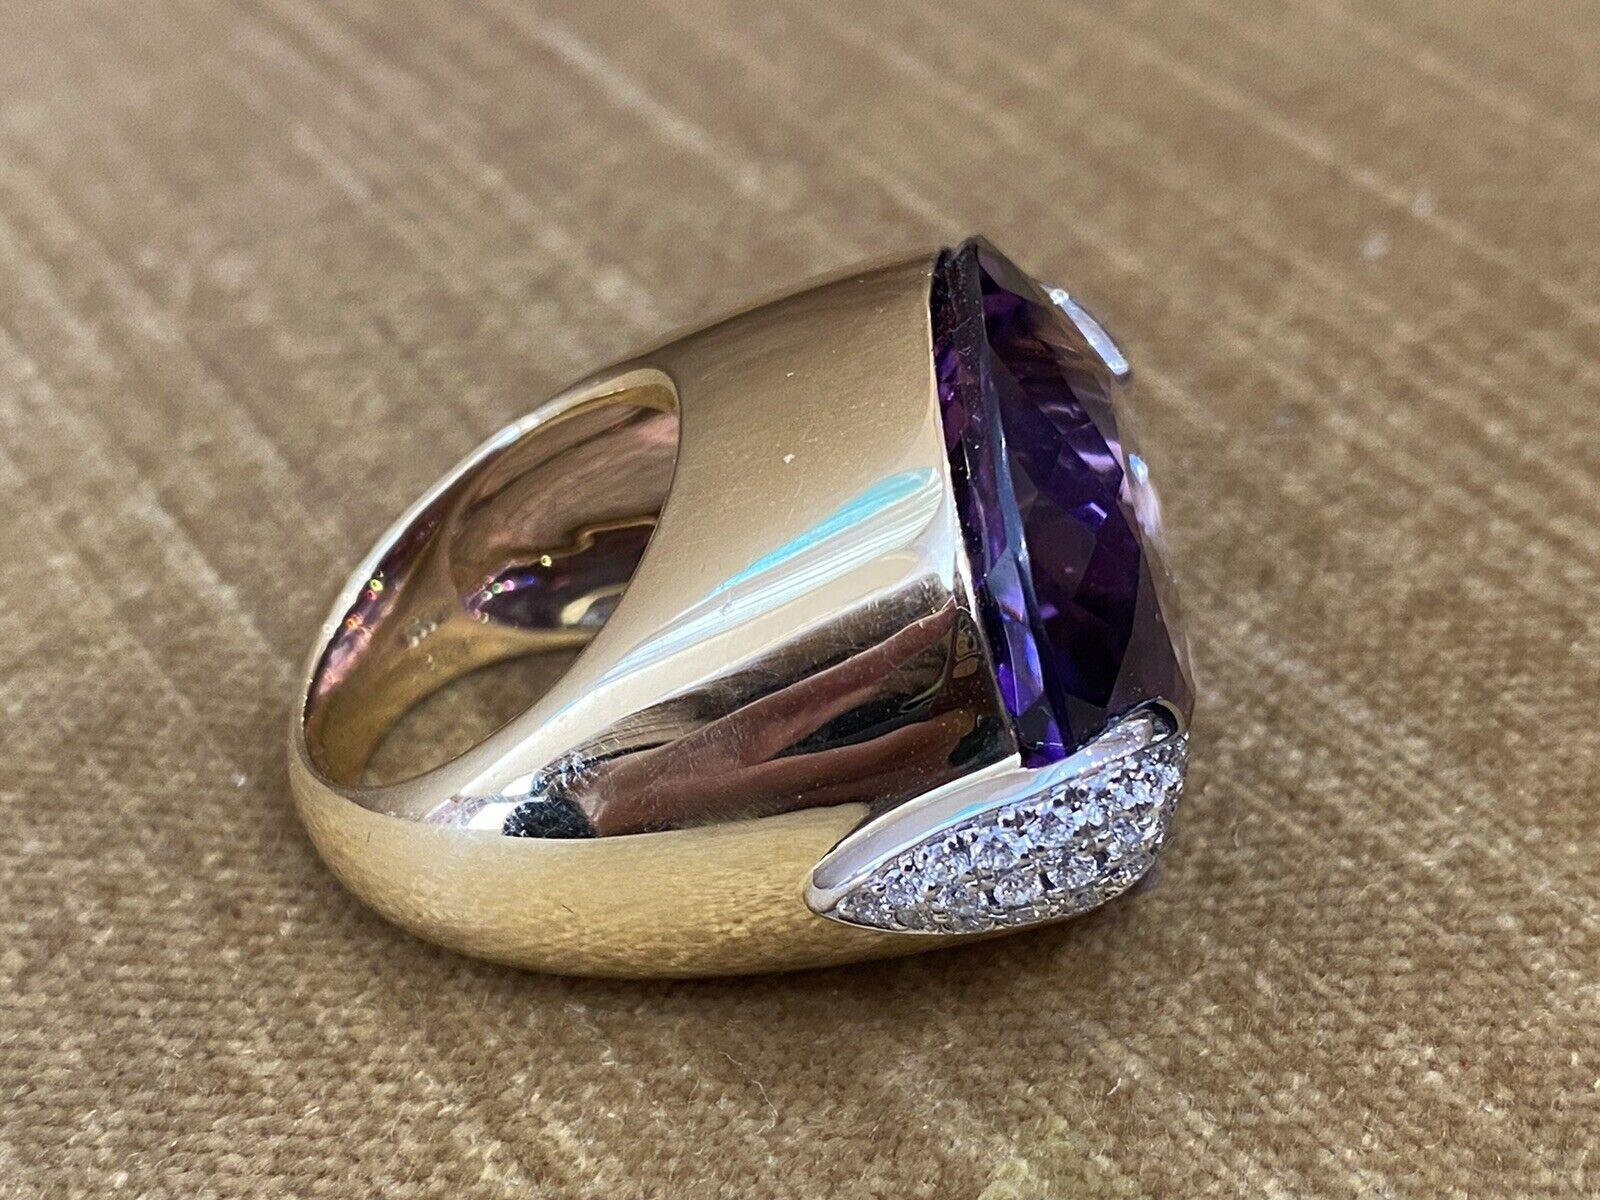 Large 54.03 carats Amethyst and Diamond Cocktail Ring in Platinum and 18k Gold In Excellent Condition For Sale In La Jolla, CA